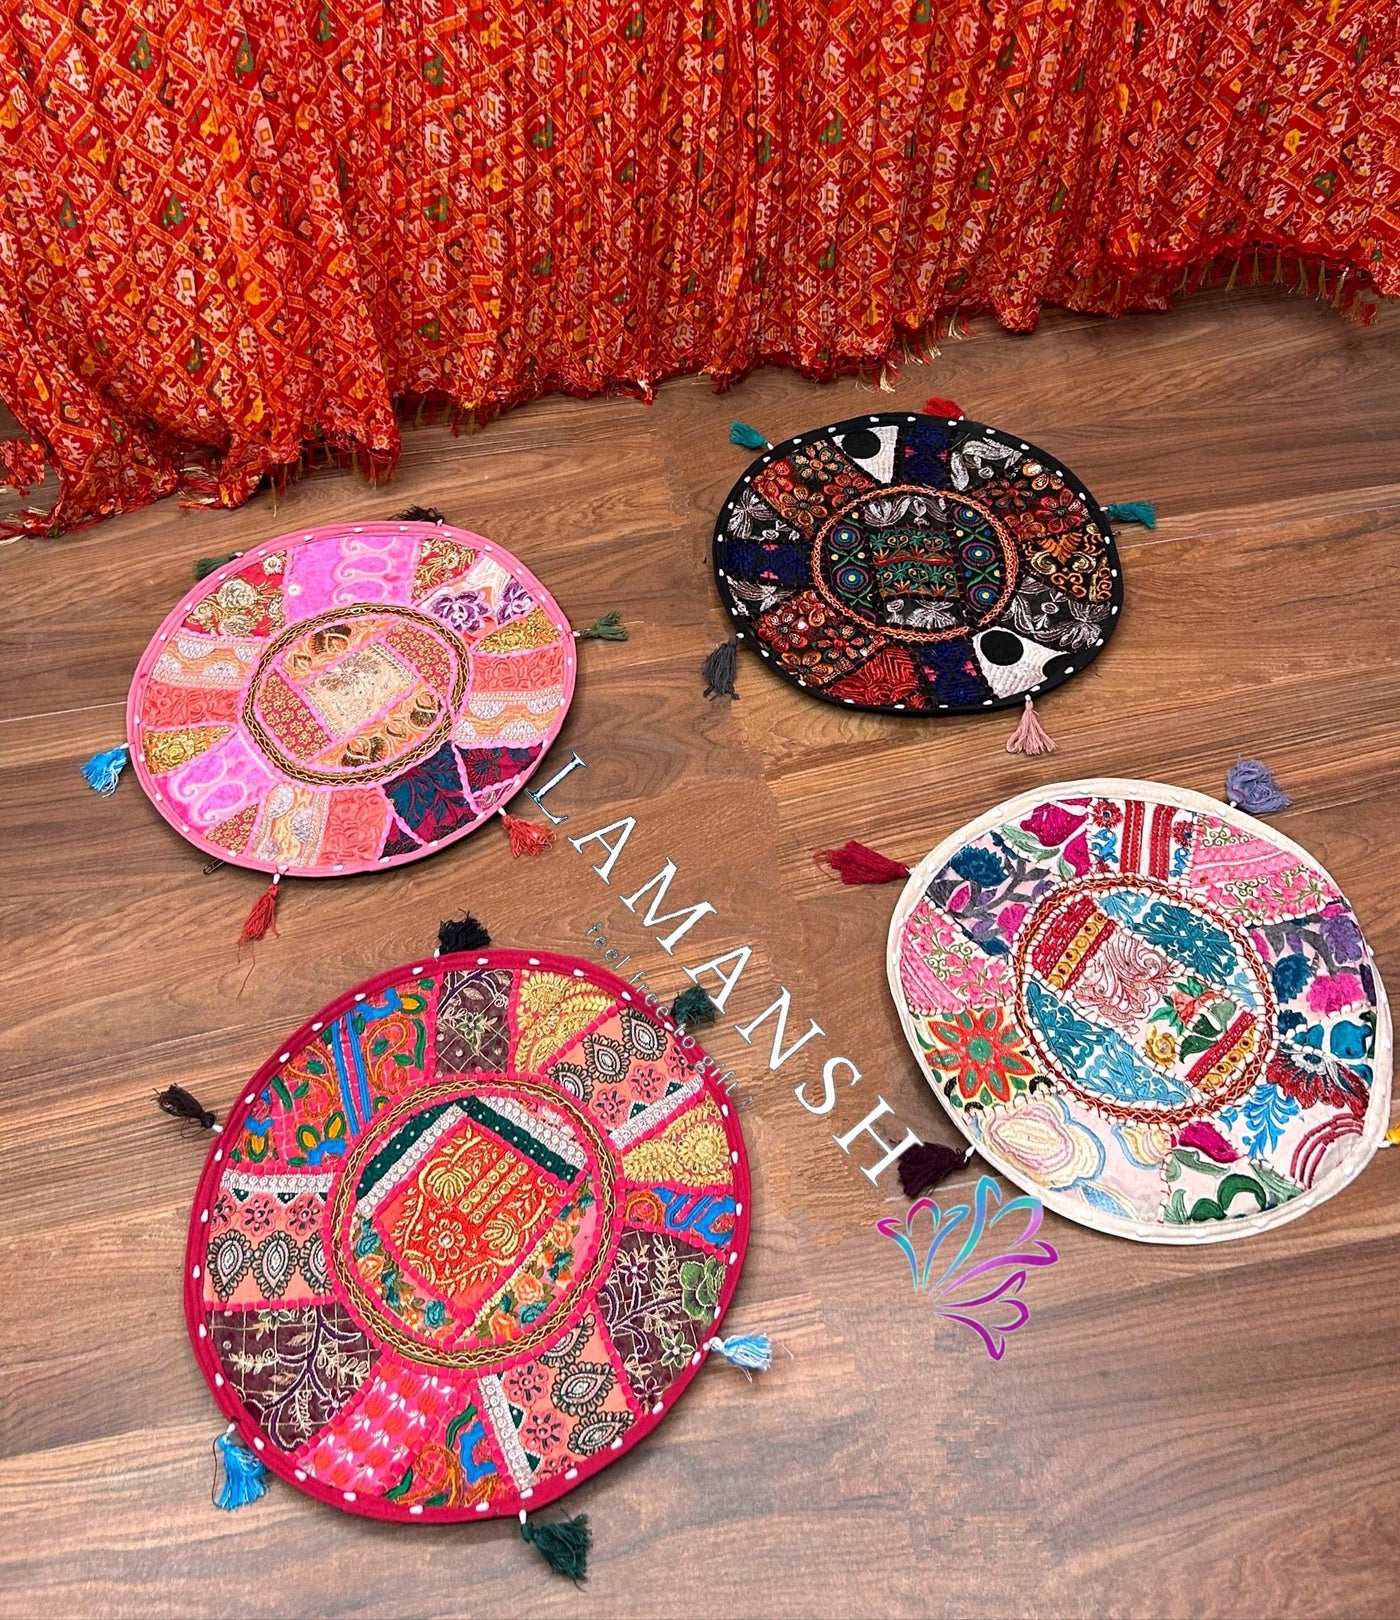 Lamansh cushion covers Special diwali Launch 🔥 Round patchwork runners / mat runners for dining table, living room, modern home decor | Table Runners for festival decorations 🔥